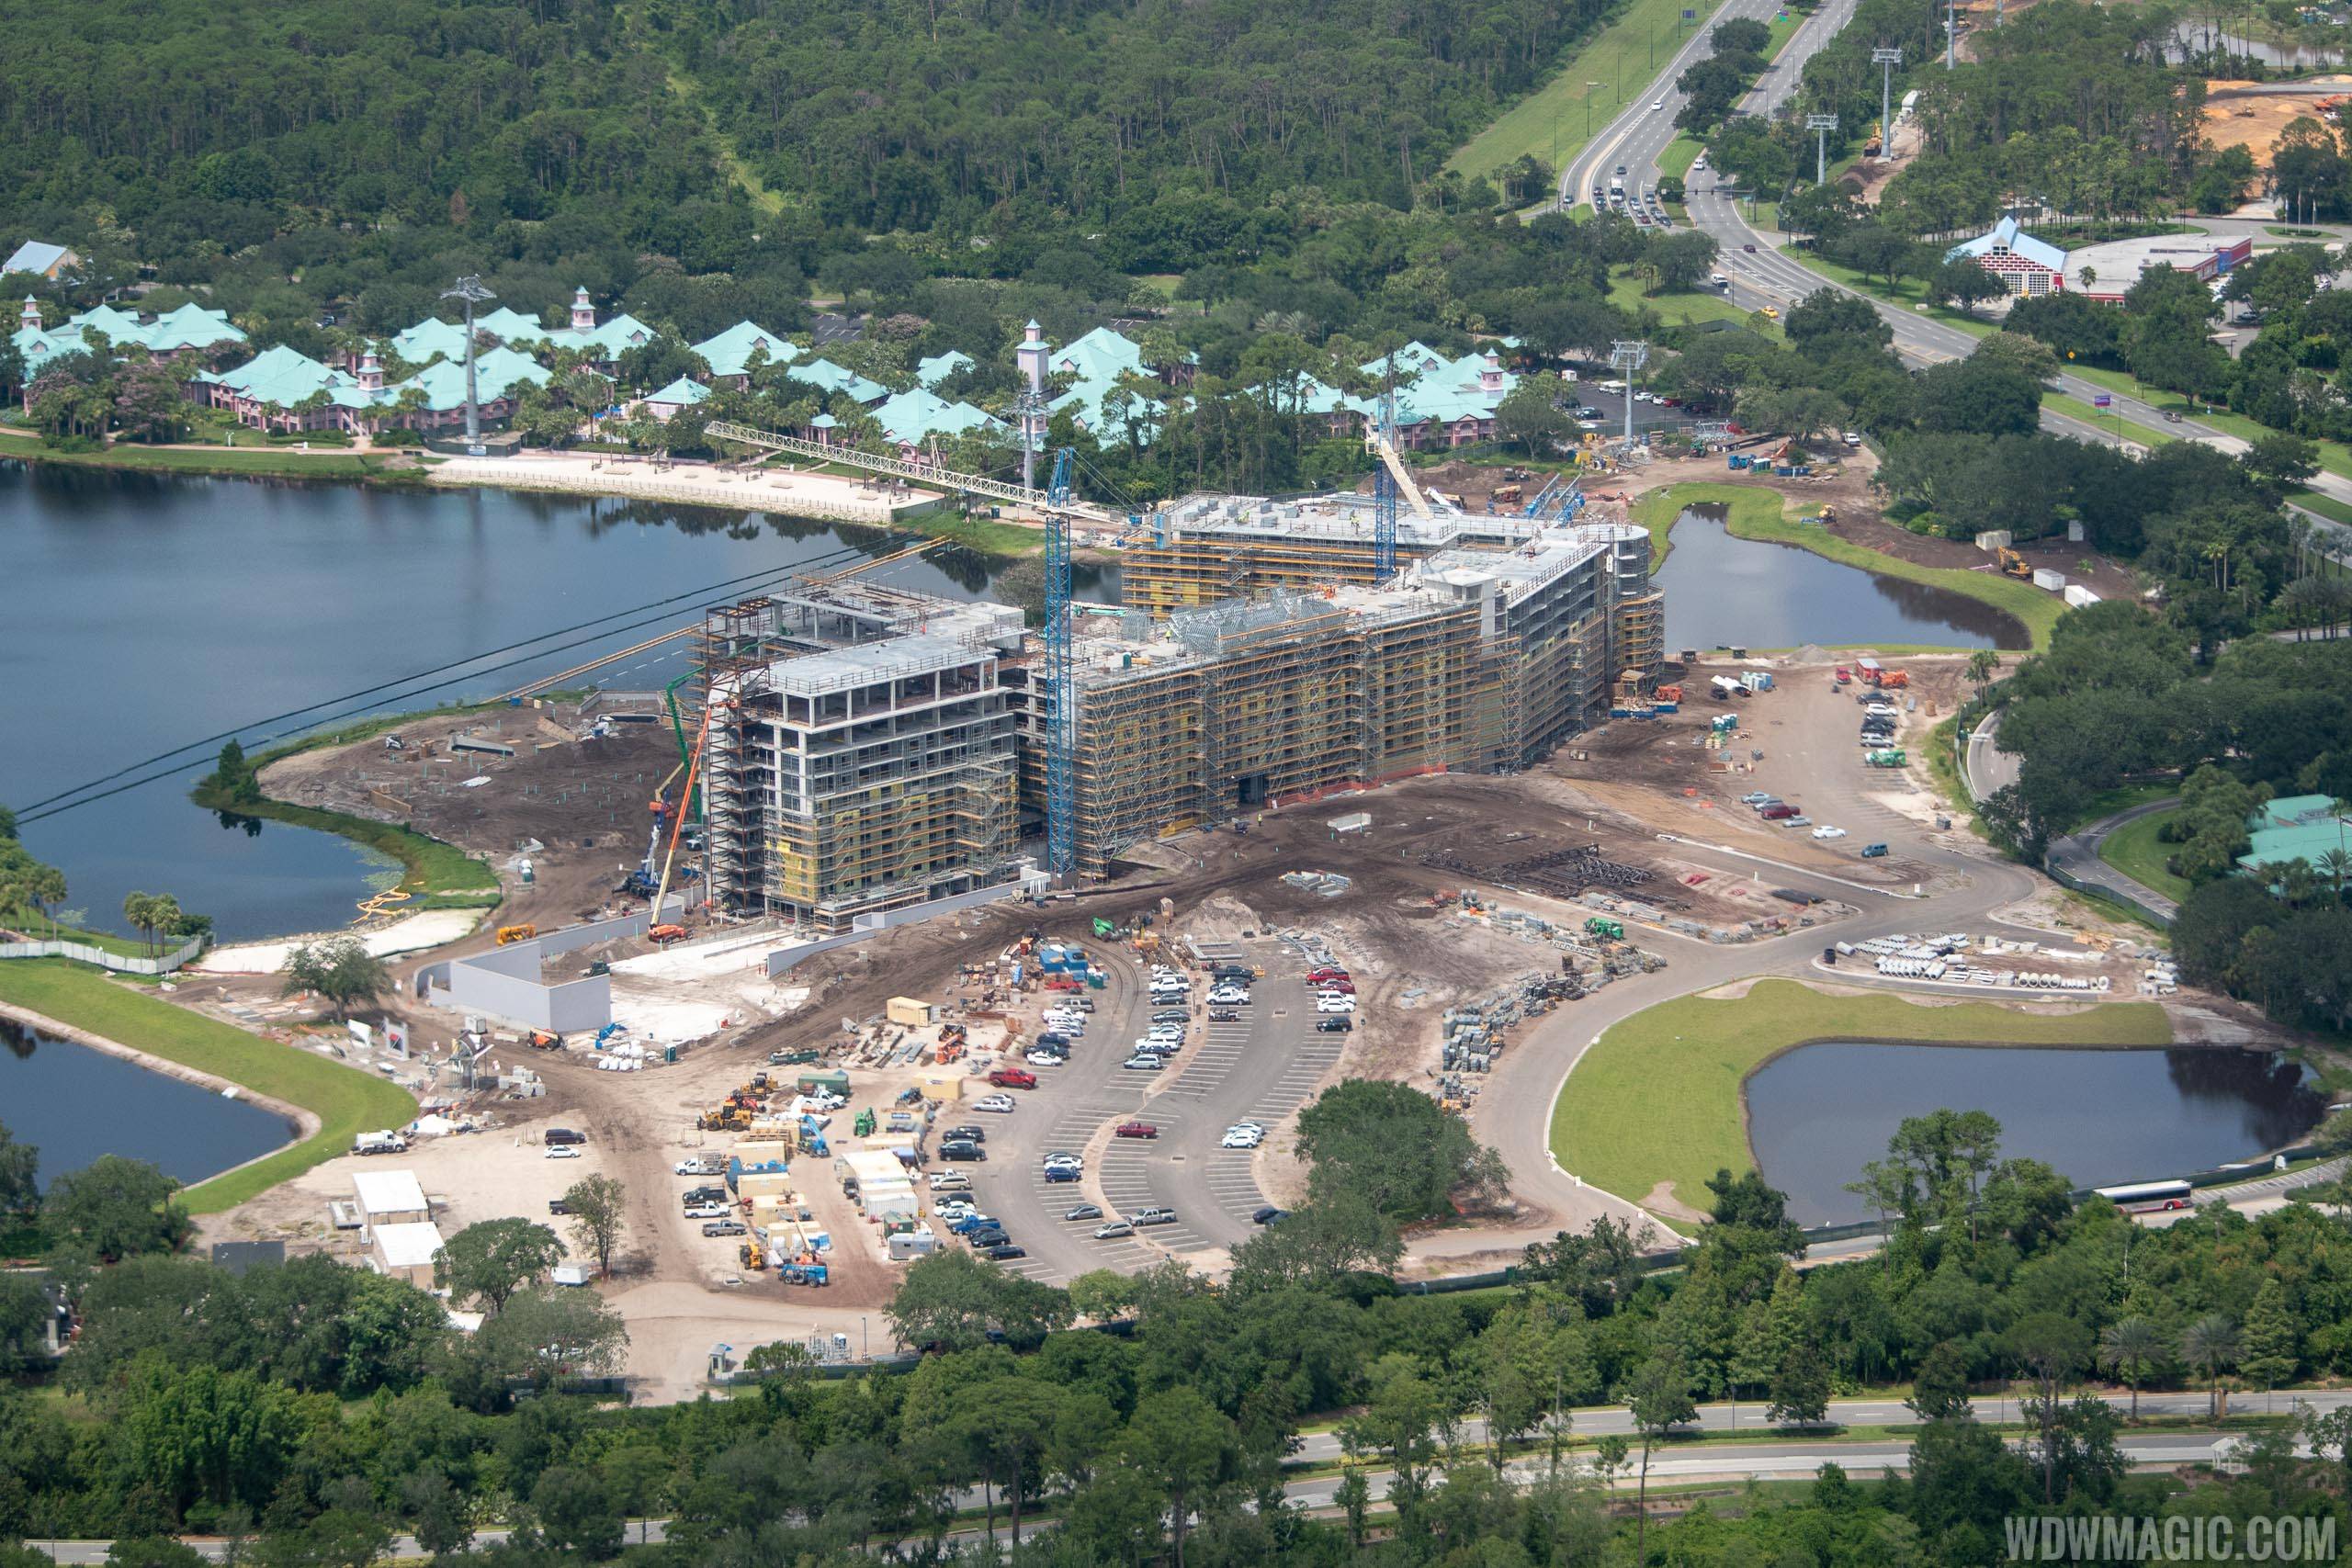 Disney Riviera construction from the air - July 2018